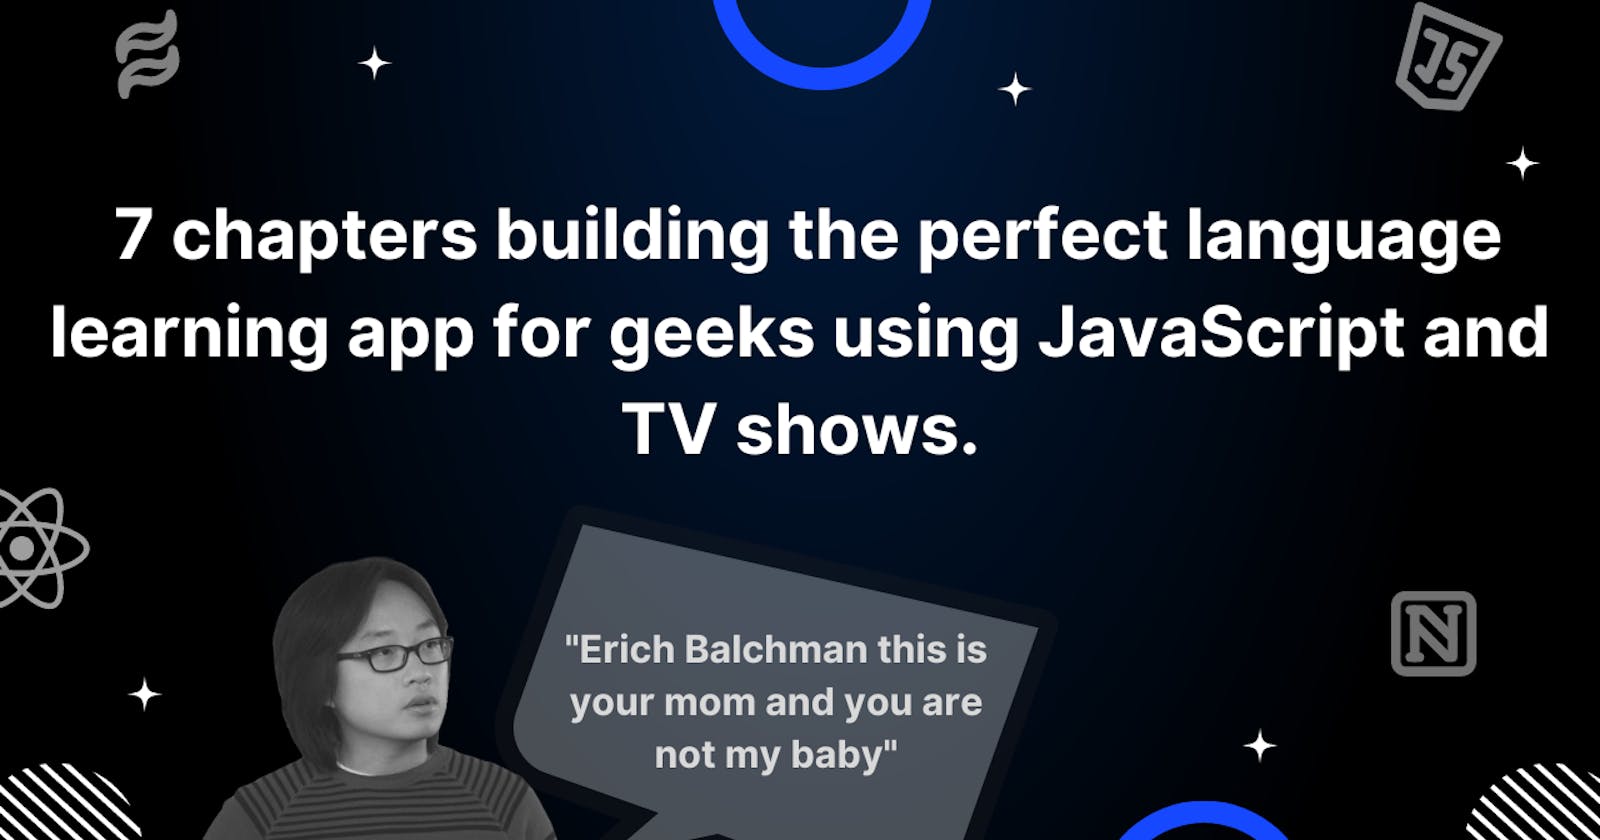 Building the perfect language learning app for geeks using TV shows and JavaScript